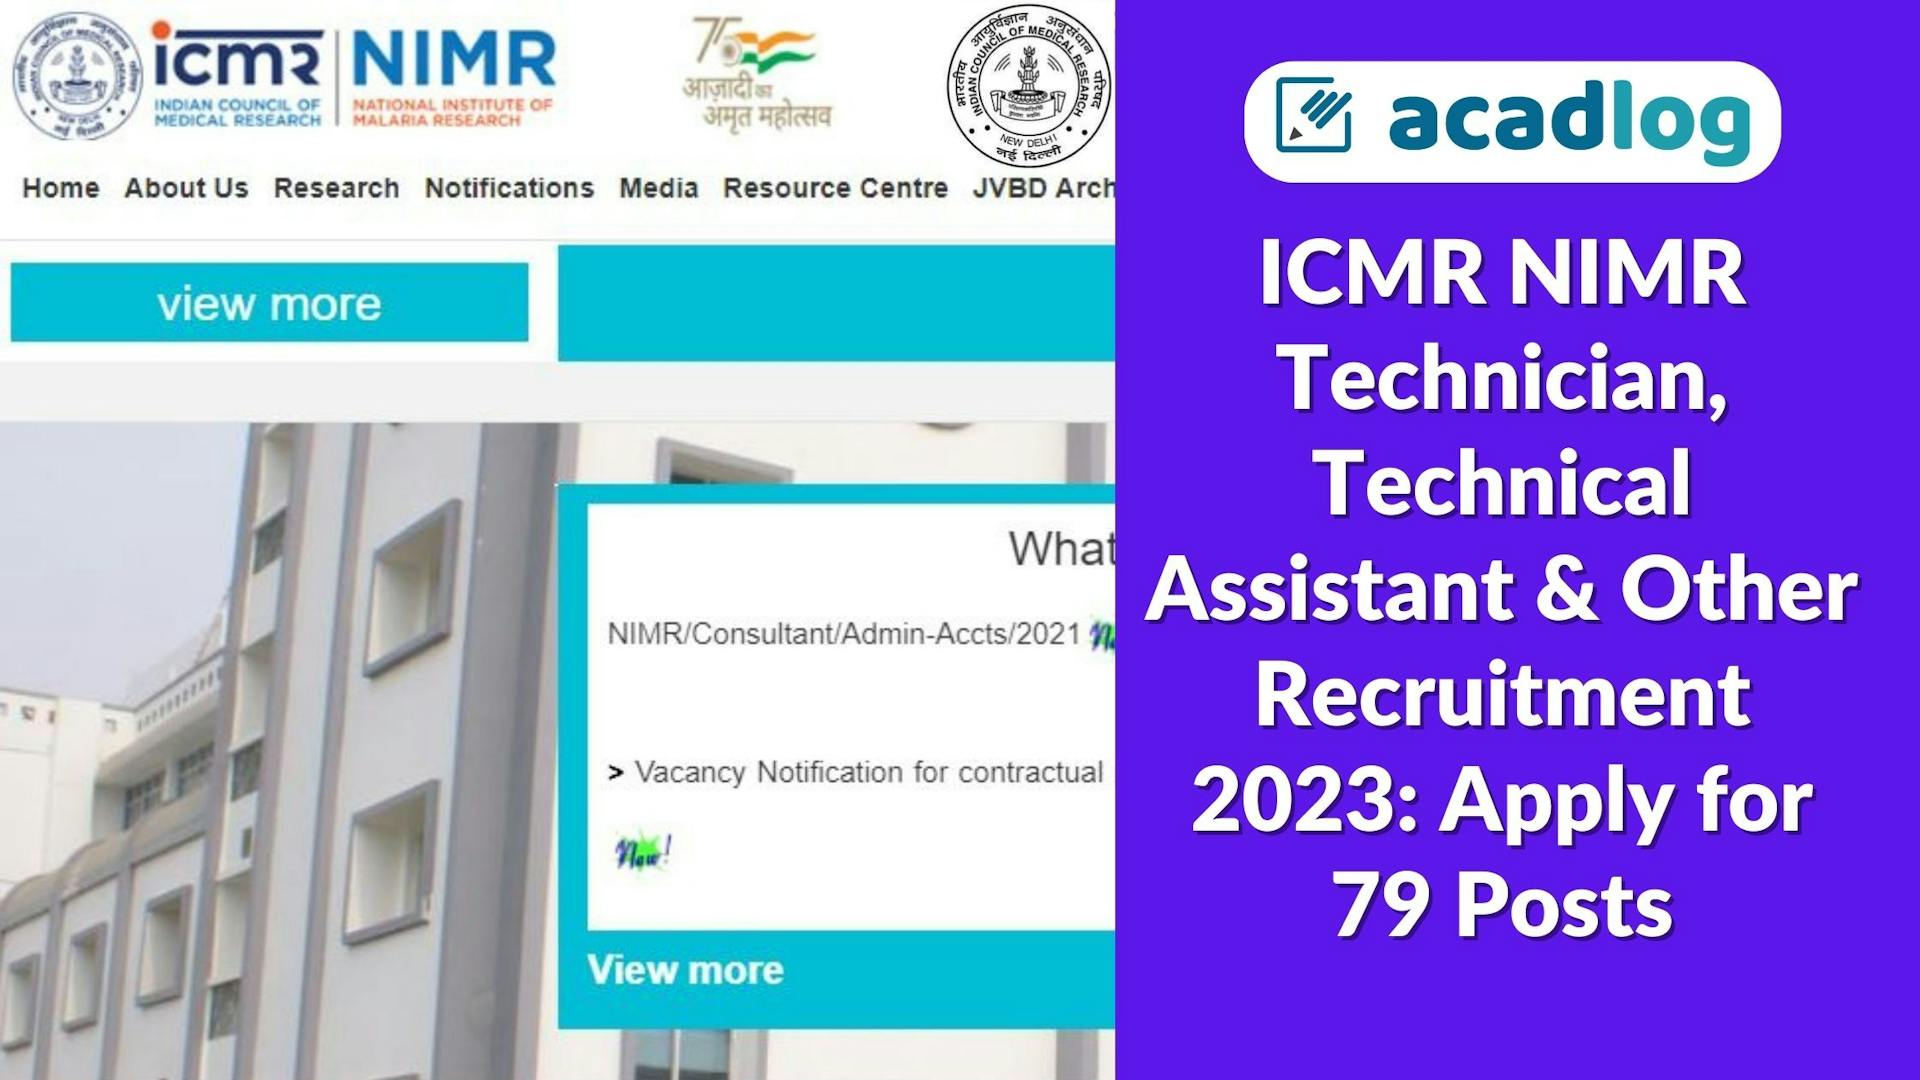 ICMR NIMR Technician, Technical Assistant & Other Recruitment 2023: Apply for 79 Posts